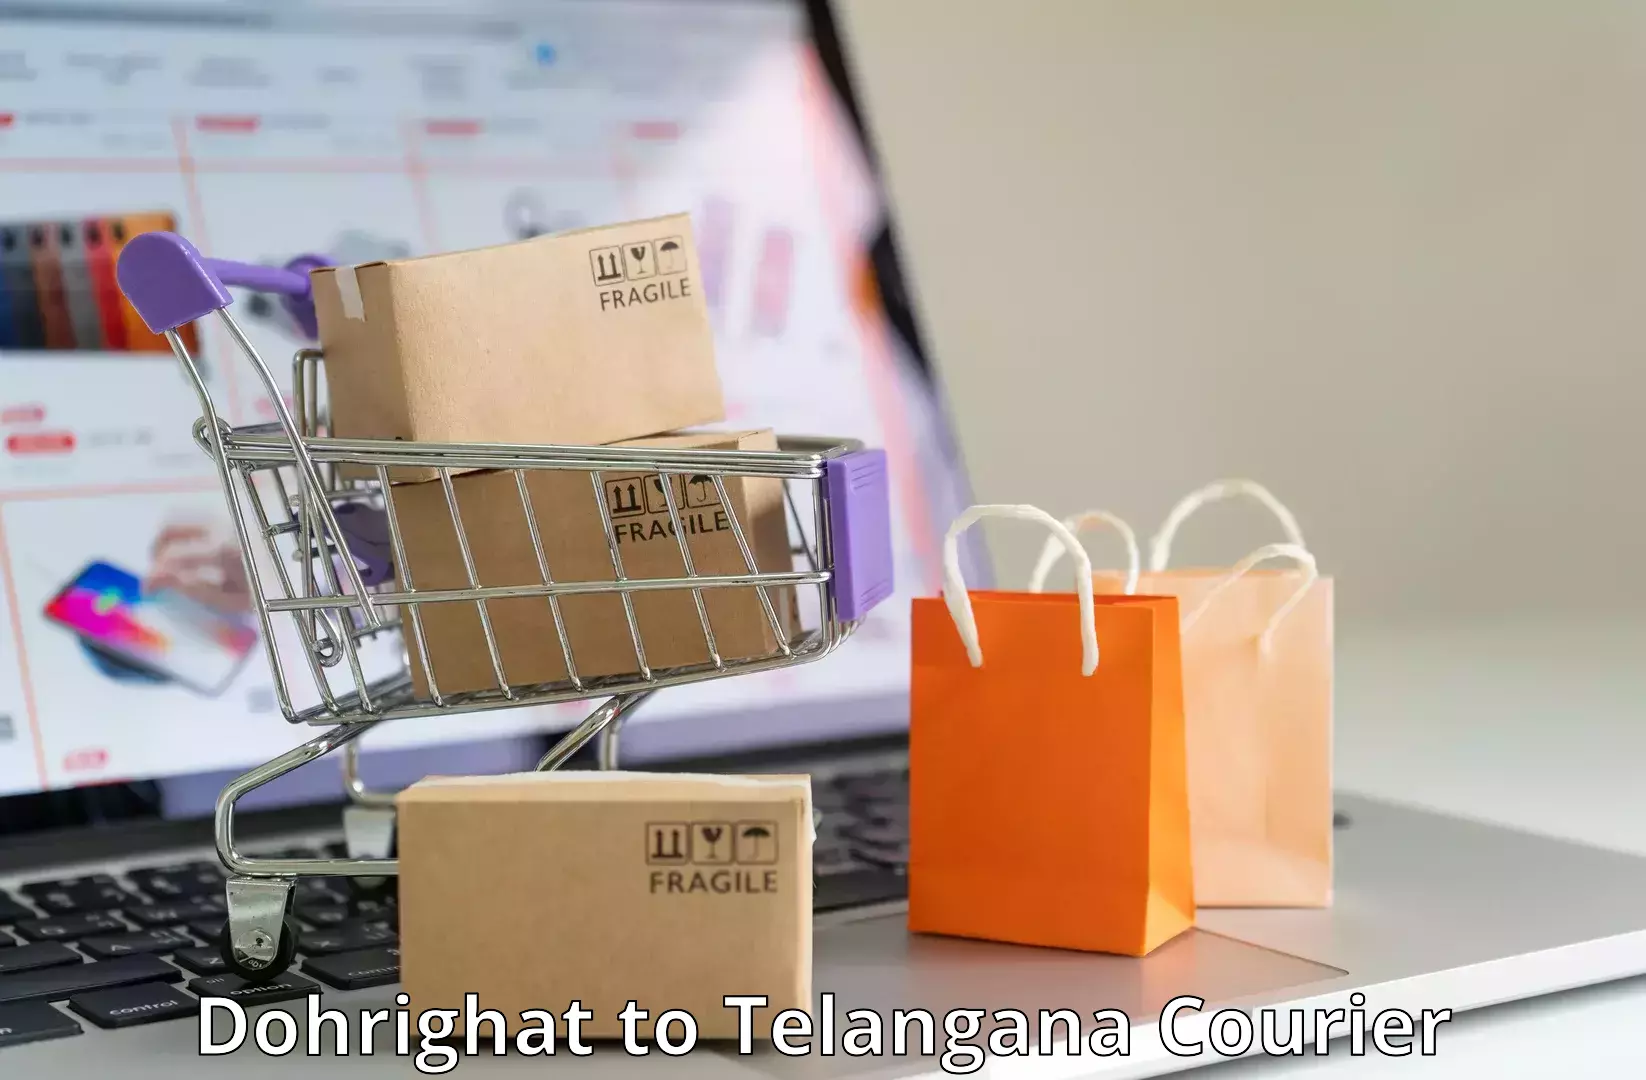 On-demand delivery Dohrighat to Netrang